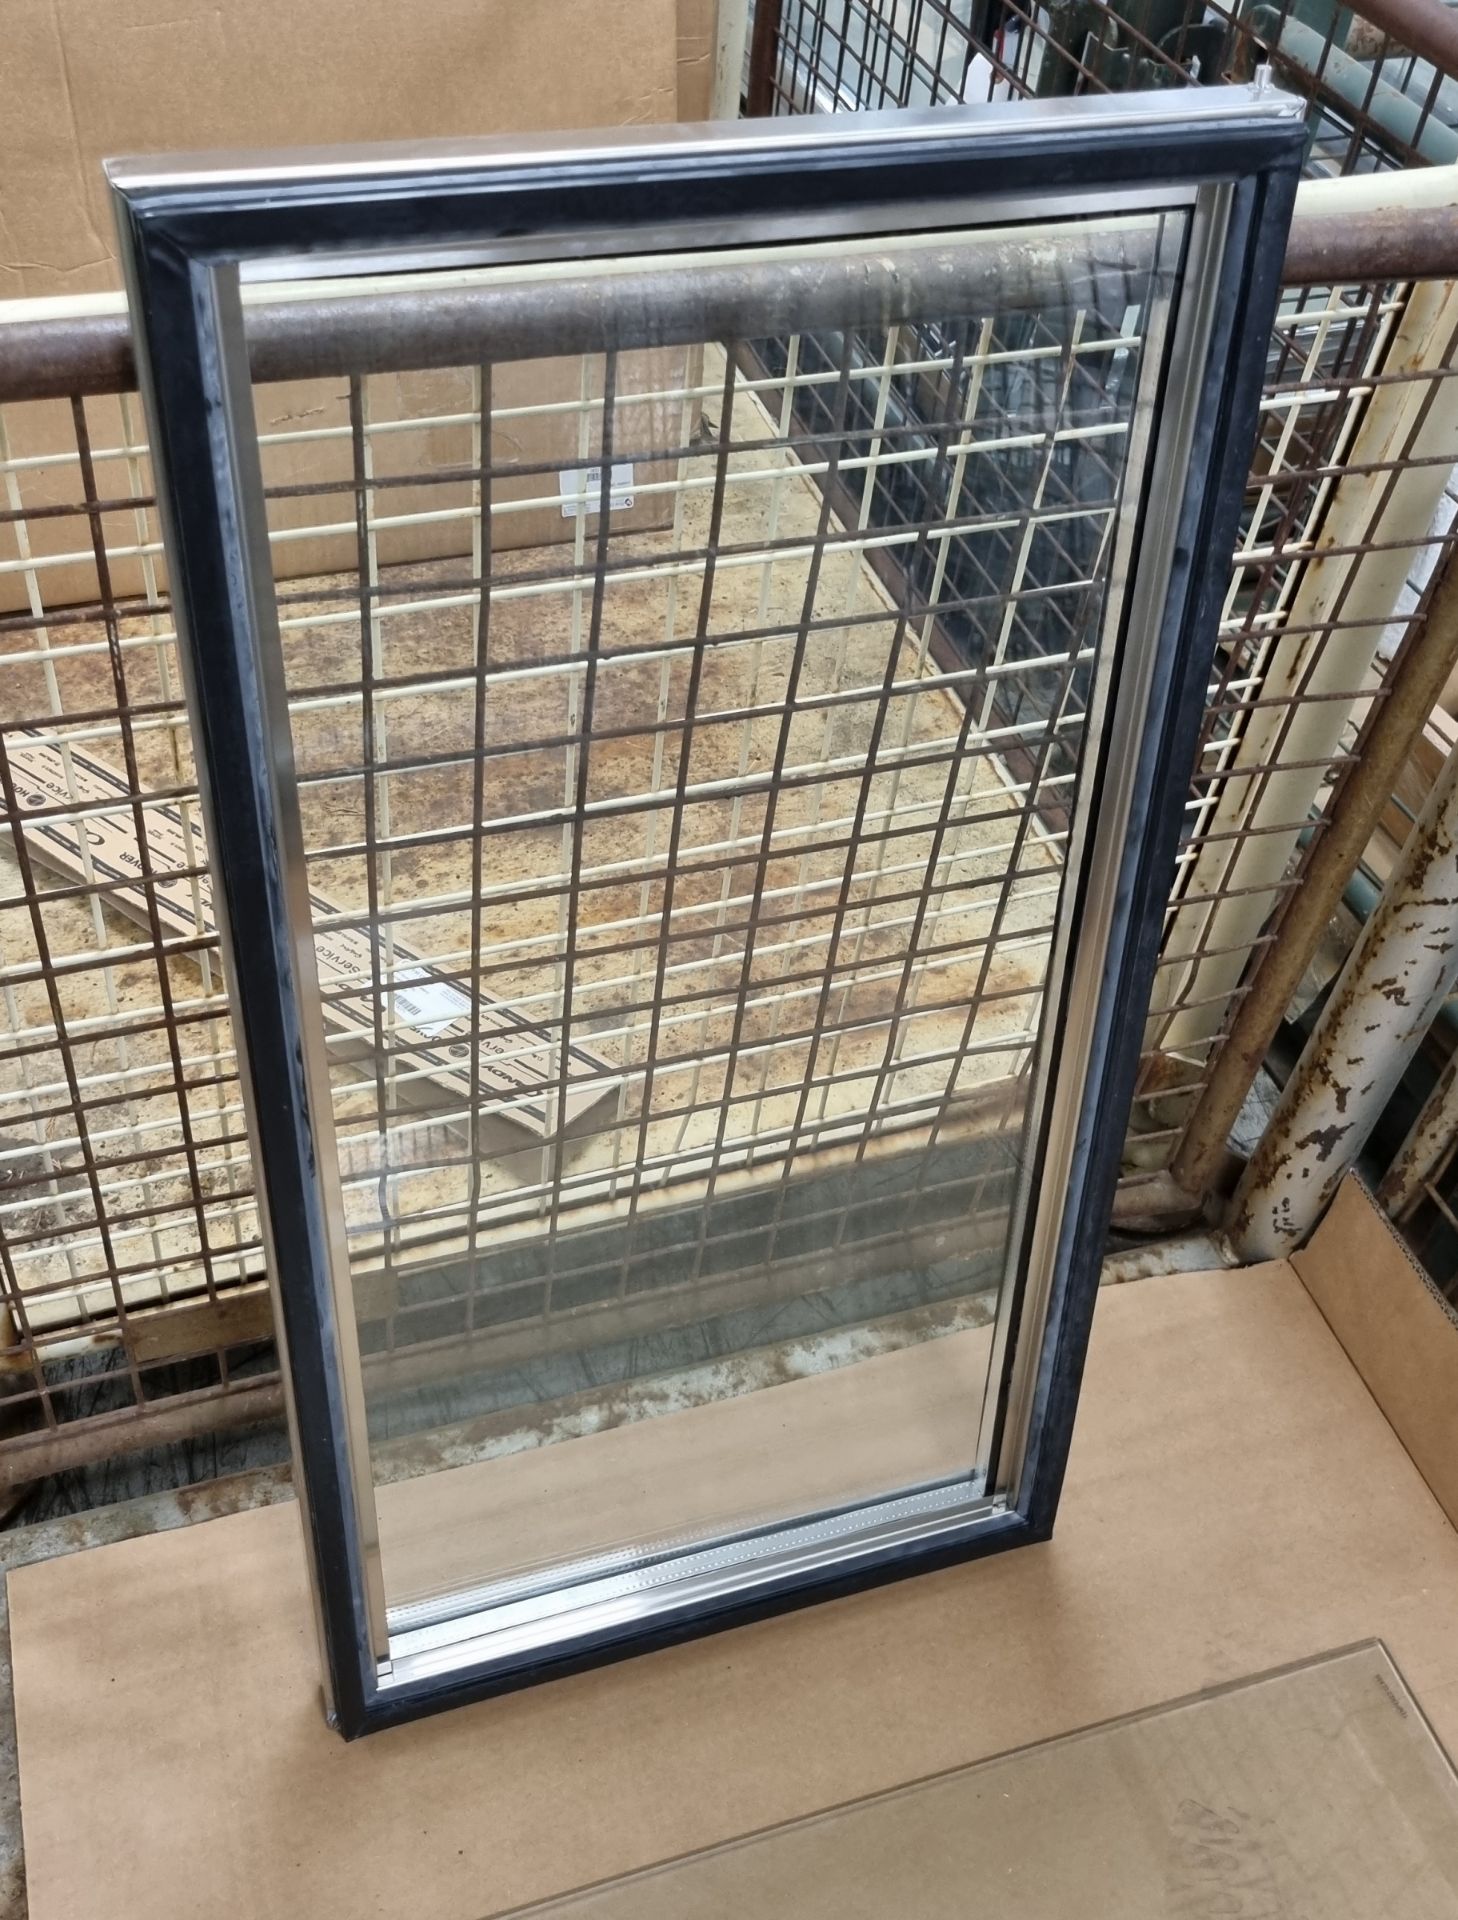 Catering spares - stainless steel framed door panel and glass end unit - Image 2 of 3